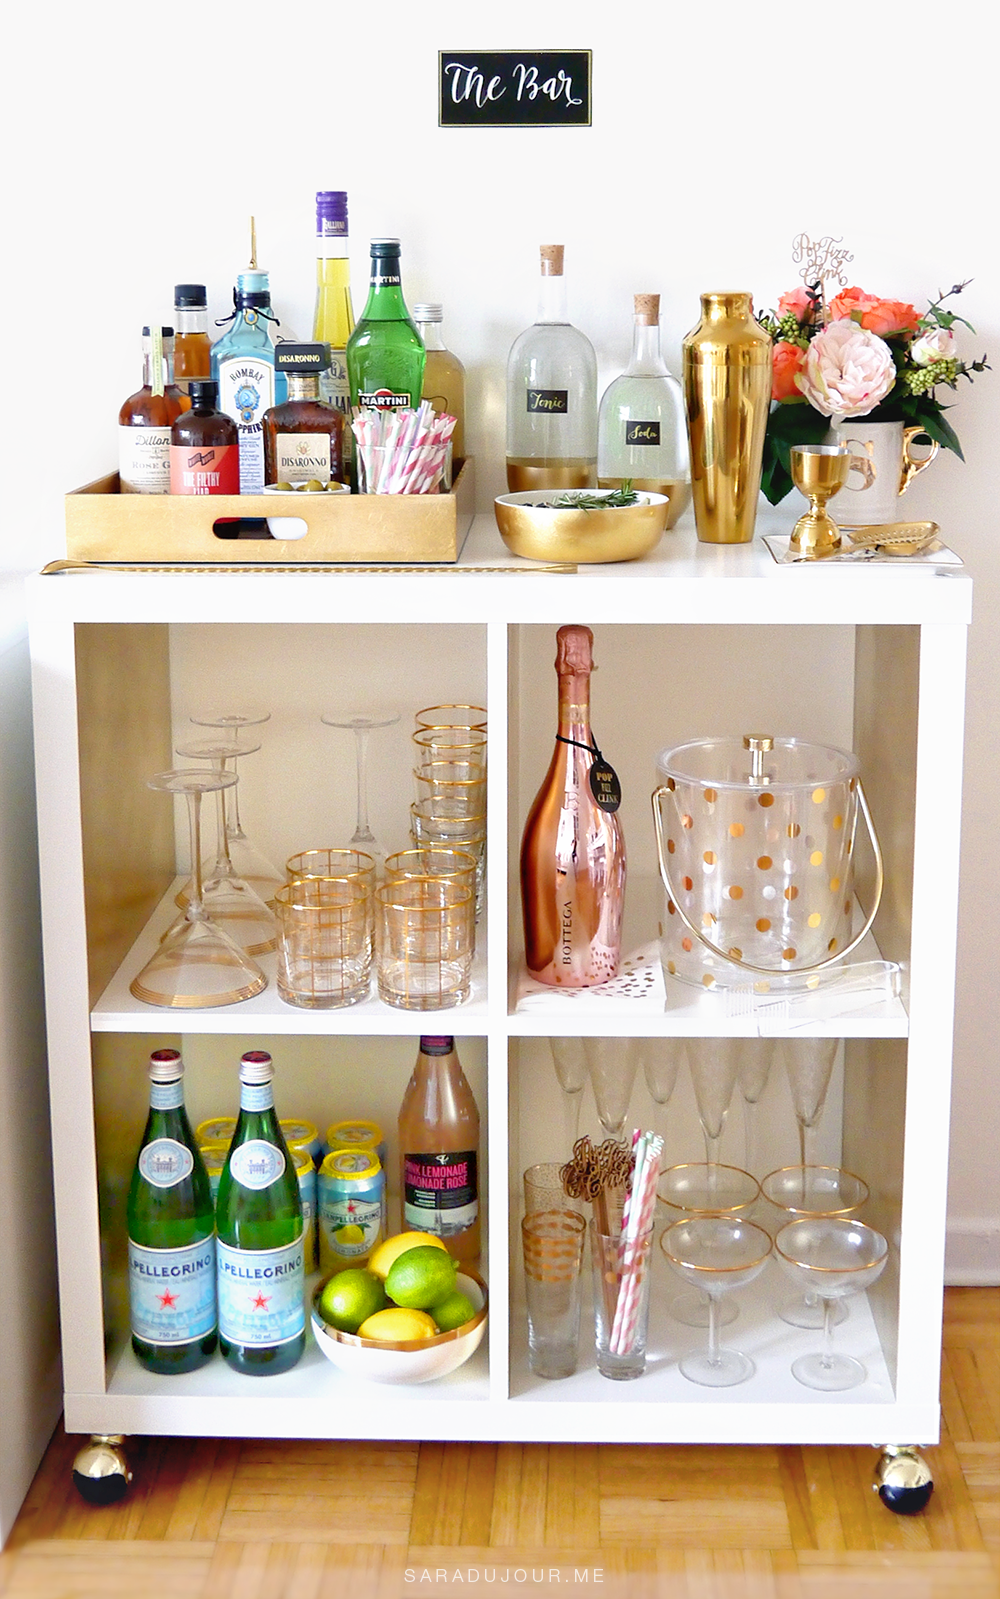 How To Create The Ultimate At-Home Bar Cart